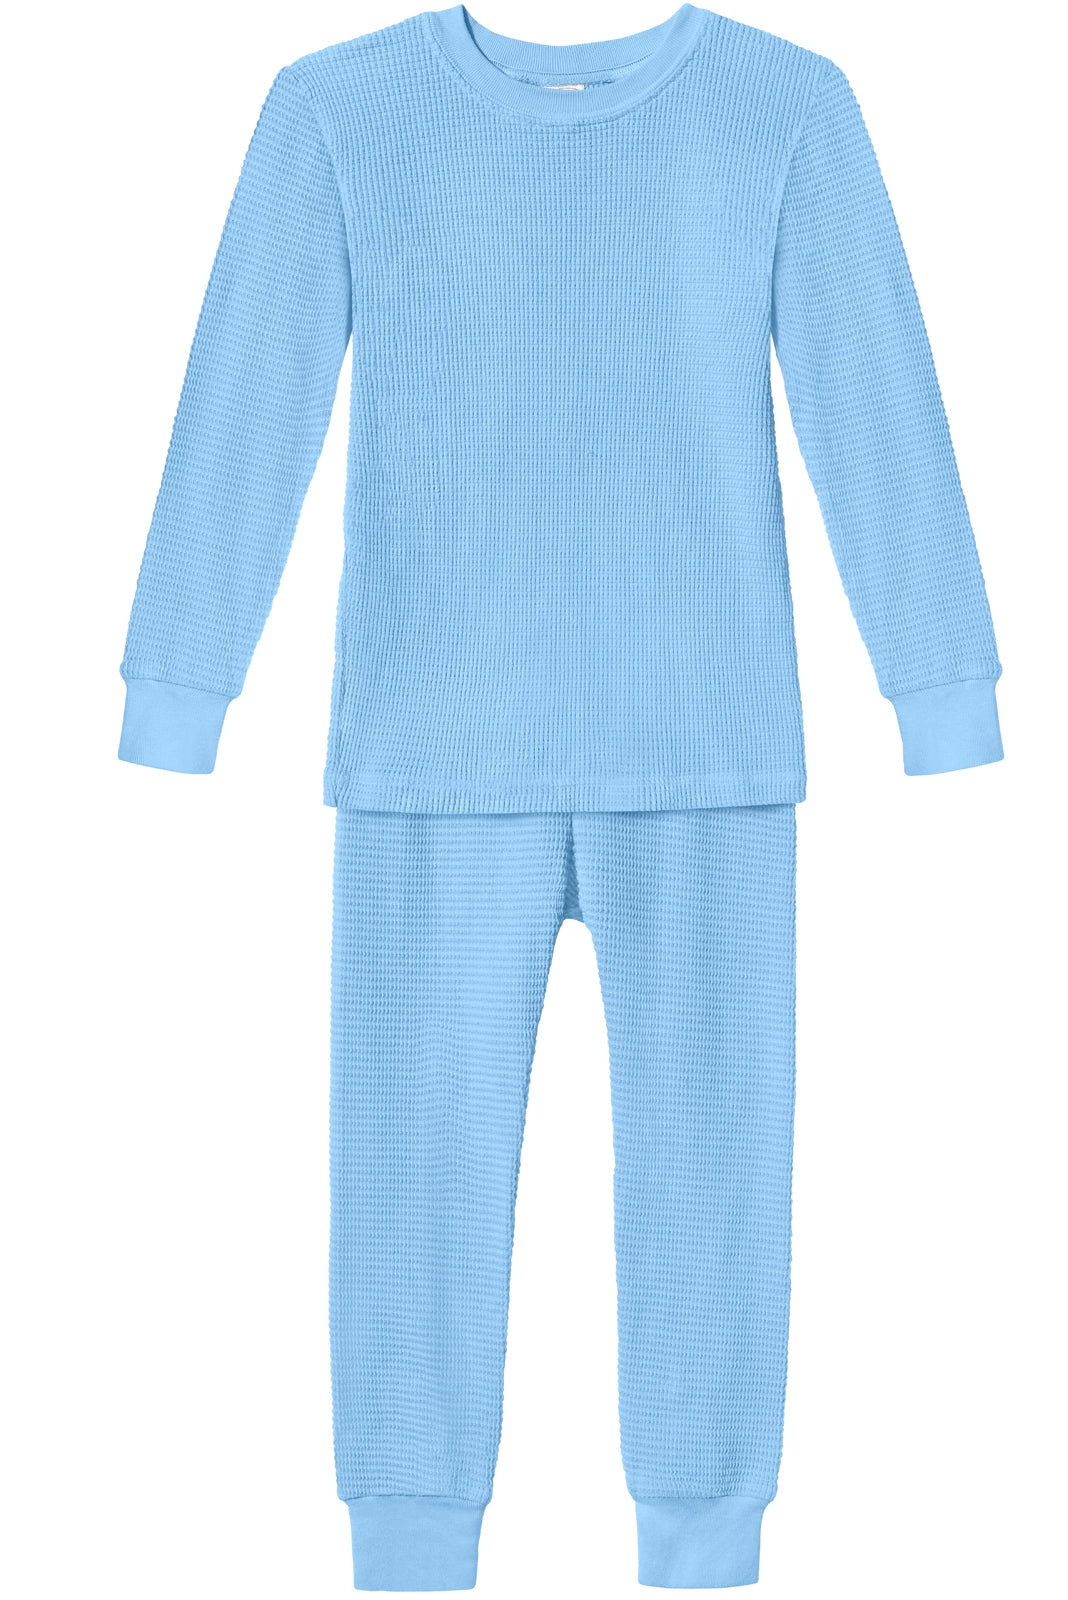 Therma Tek Boy's 100% Cotton Light Weight Waffle Knit Thermal Top